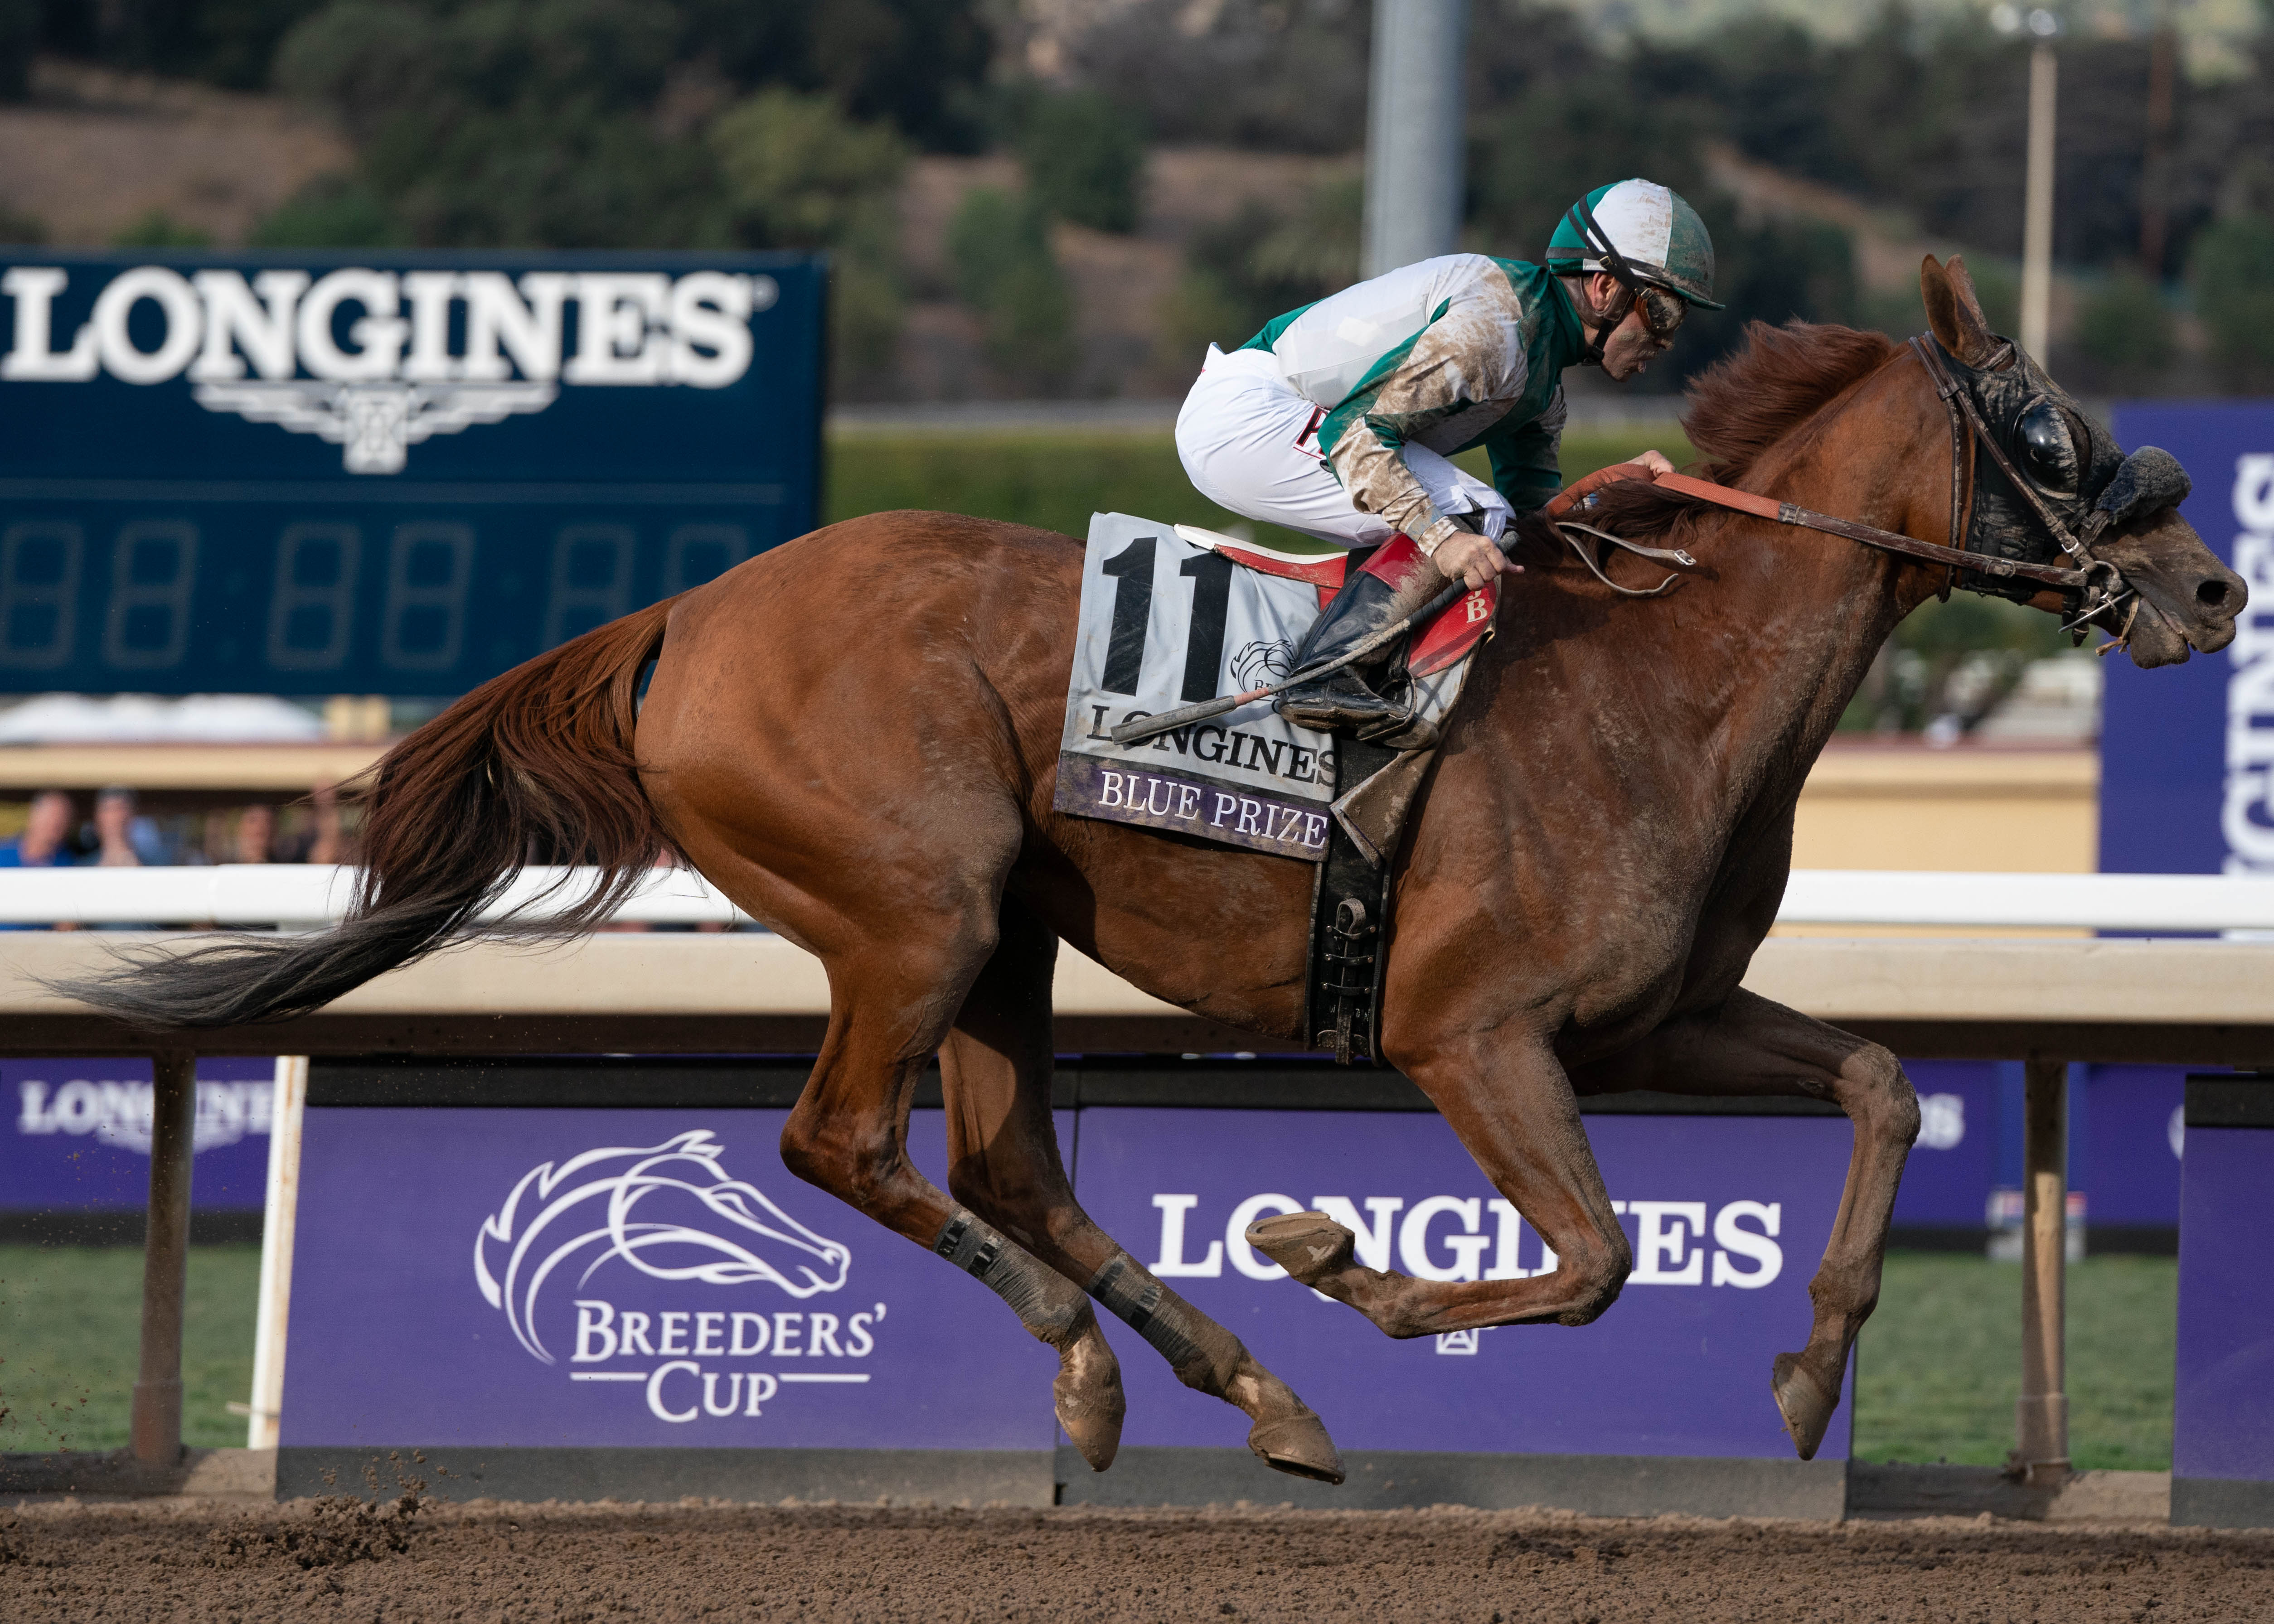 Breeders cup mile betting odds argentina-brazil betting expert boxing